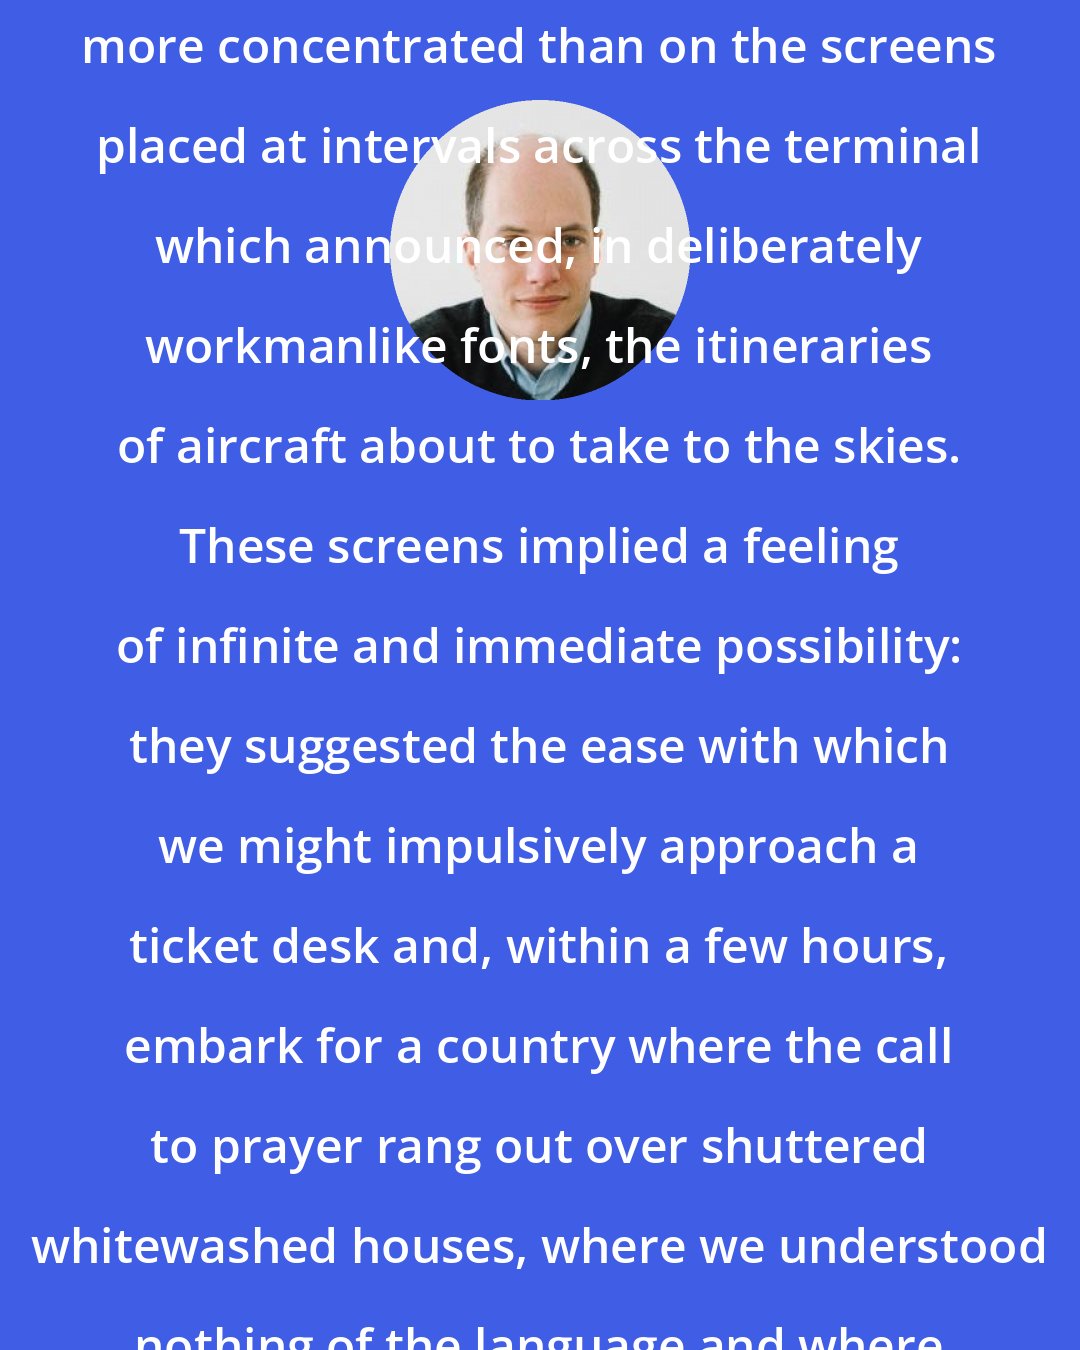 Alain de Botton: Nowhere was the airport's charm more concentrated than on the screens placed at intervals across the terminal which announced, in deliberately workmanlike fonts, the itineraries of aircraft about to take to the skies. These screens implied a feeling of infinite and immediate possibility: they suggested the ease with which we might impulsively approach a ticket desk and, within a few hours, embark for a country where the call to prayer rang out over shuttered whitewashed houses, where we understood nothing of the language and where no one knew our identities.